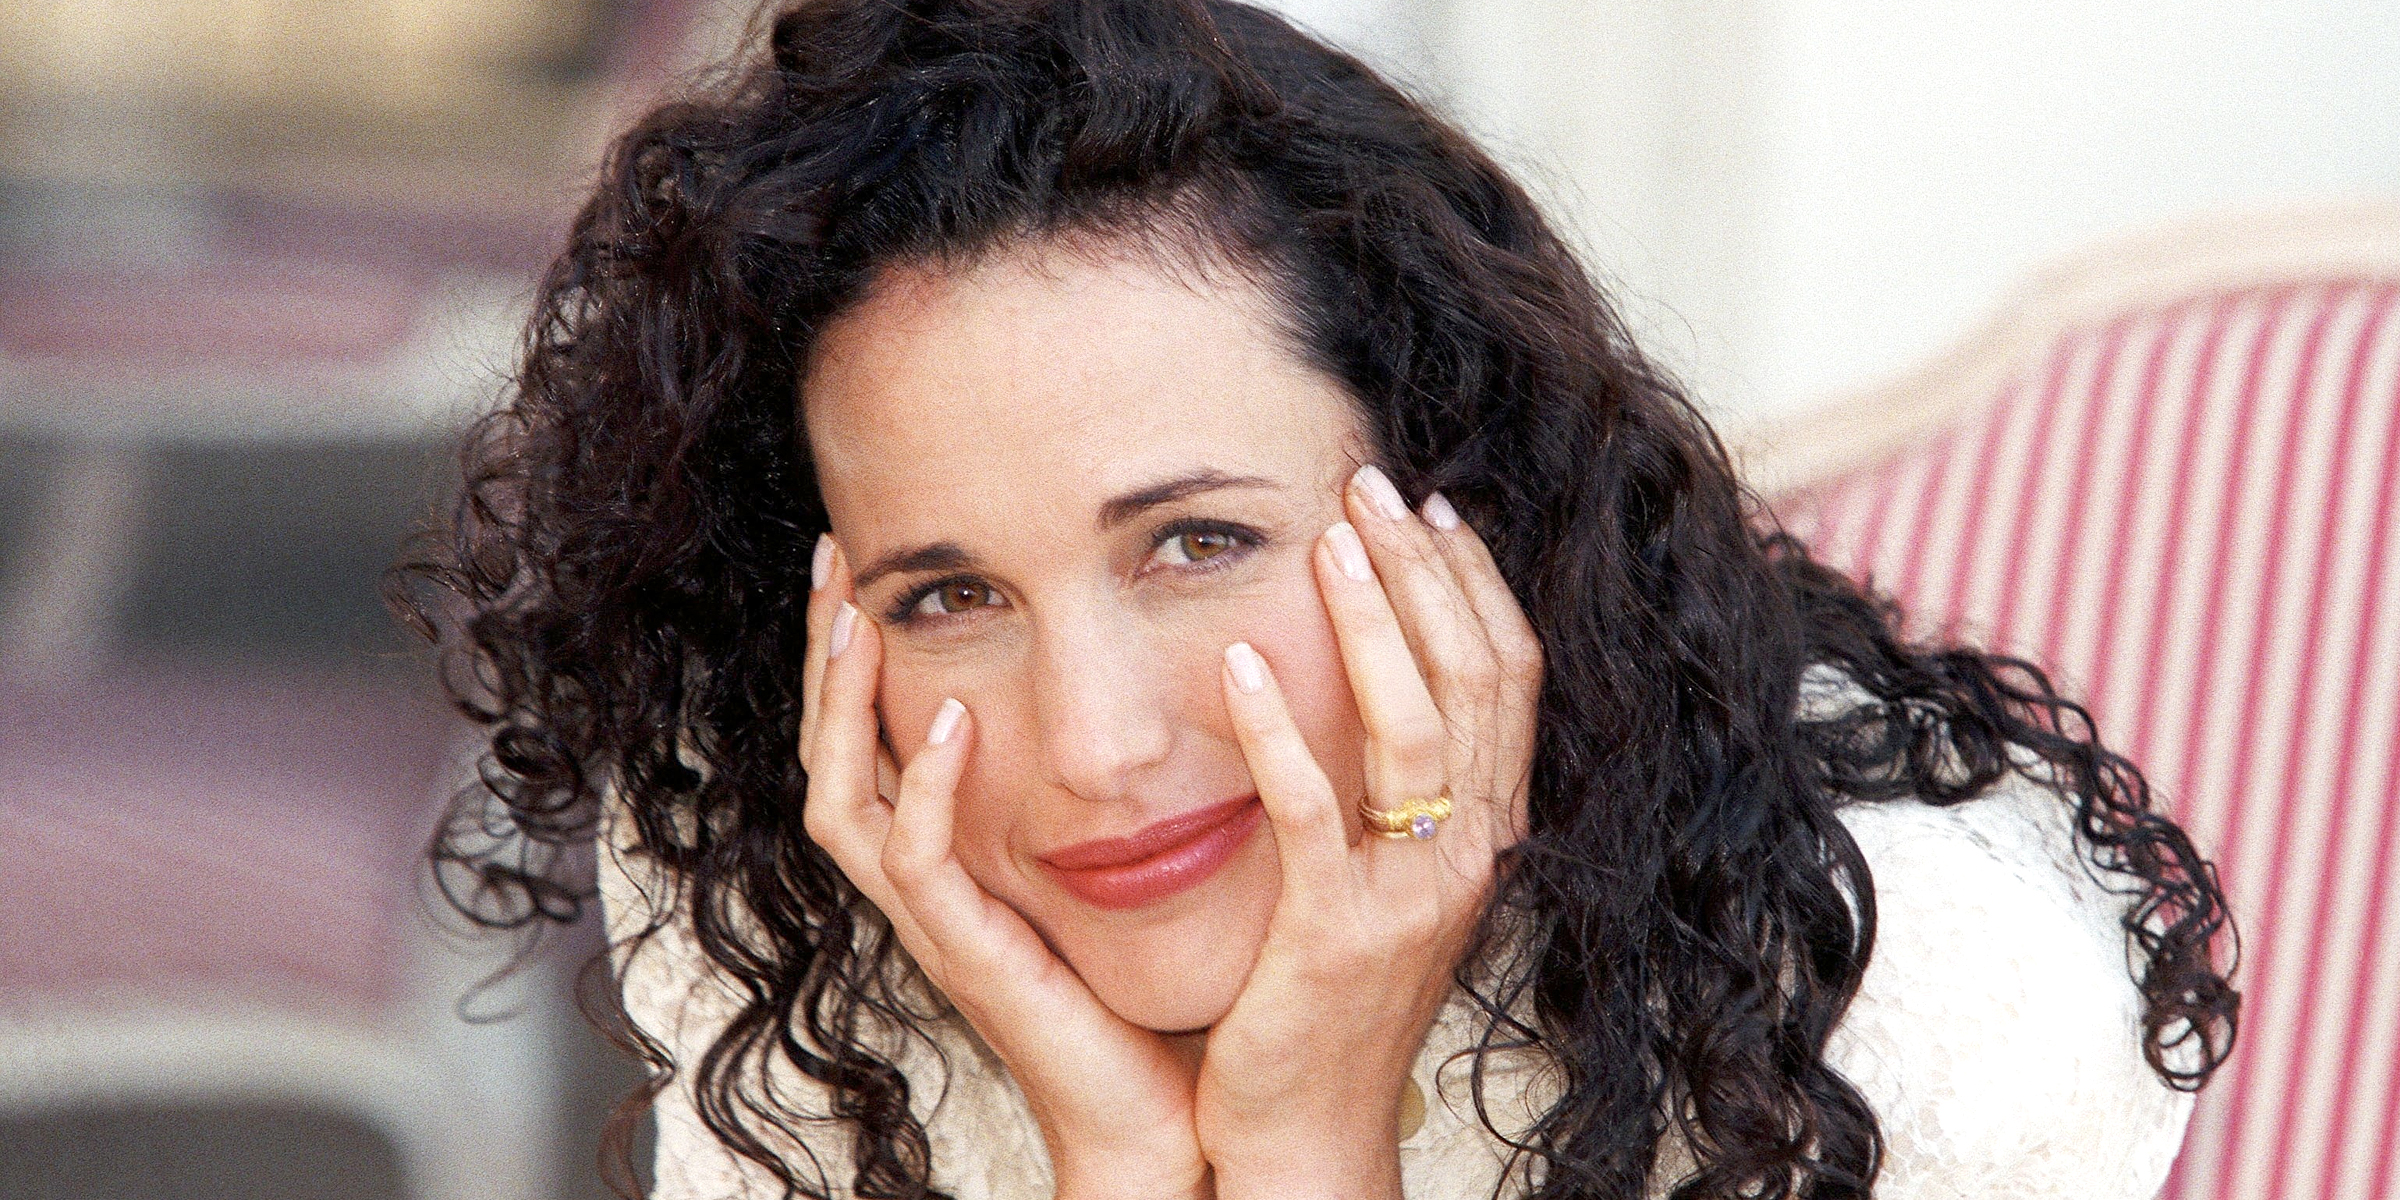 Andie MacDowell, 1996 | Source: Getty Images